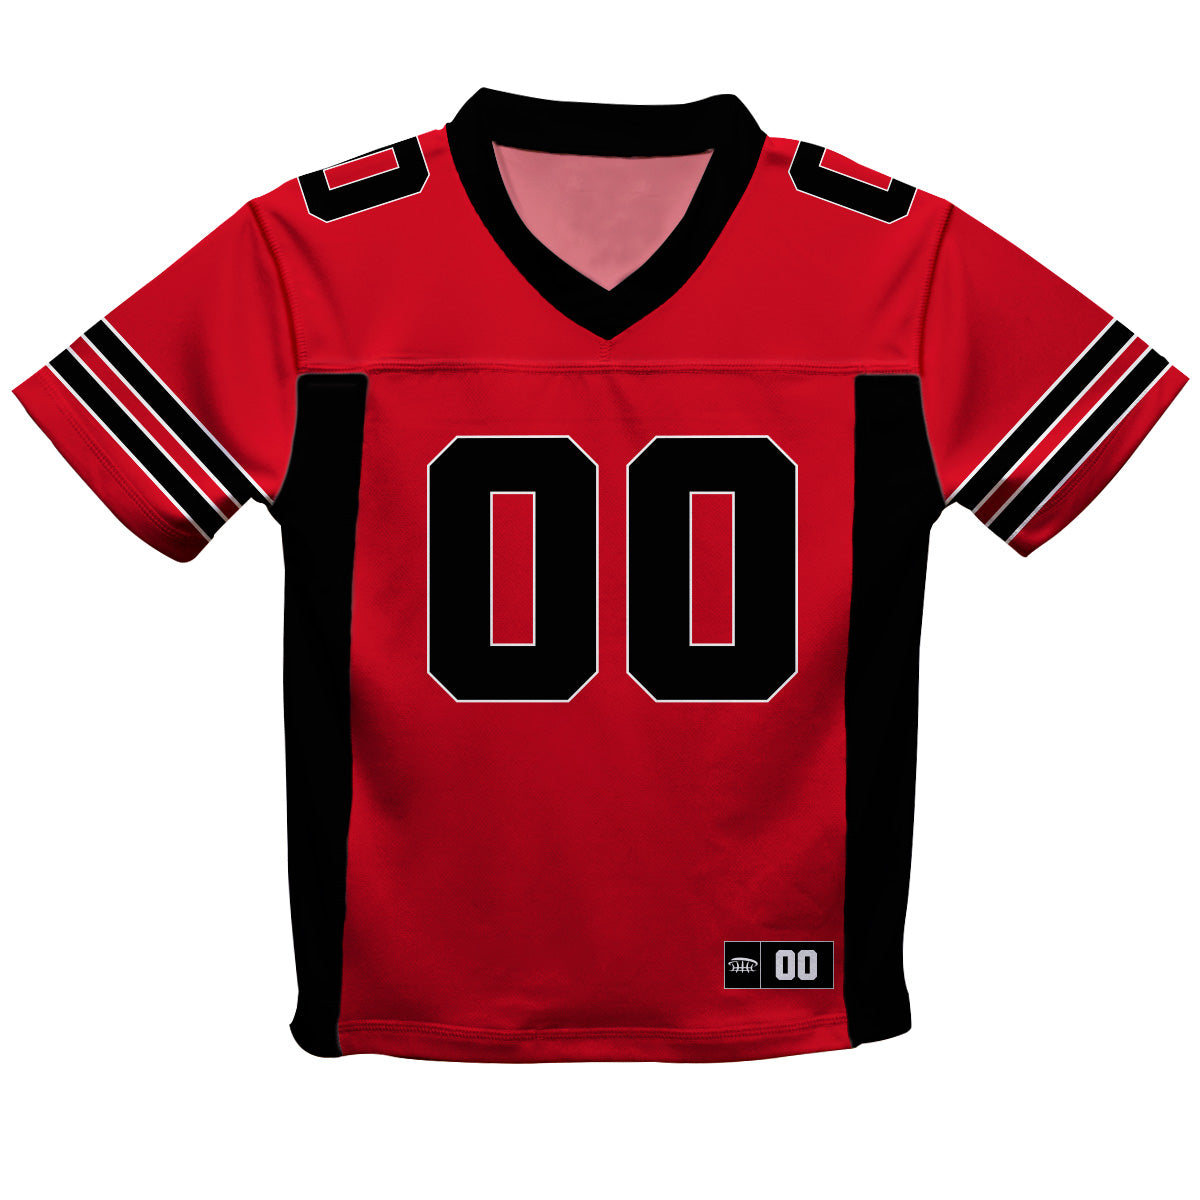 Personalized Name and Number Red and Black Fashion Football T-Shirt